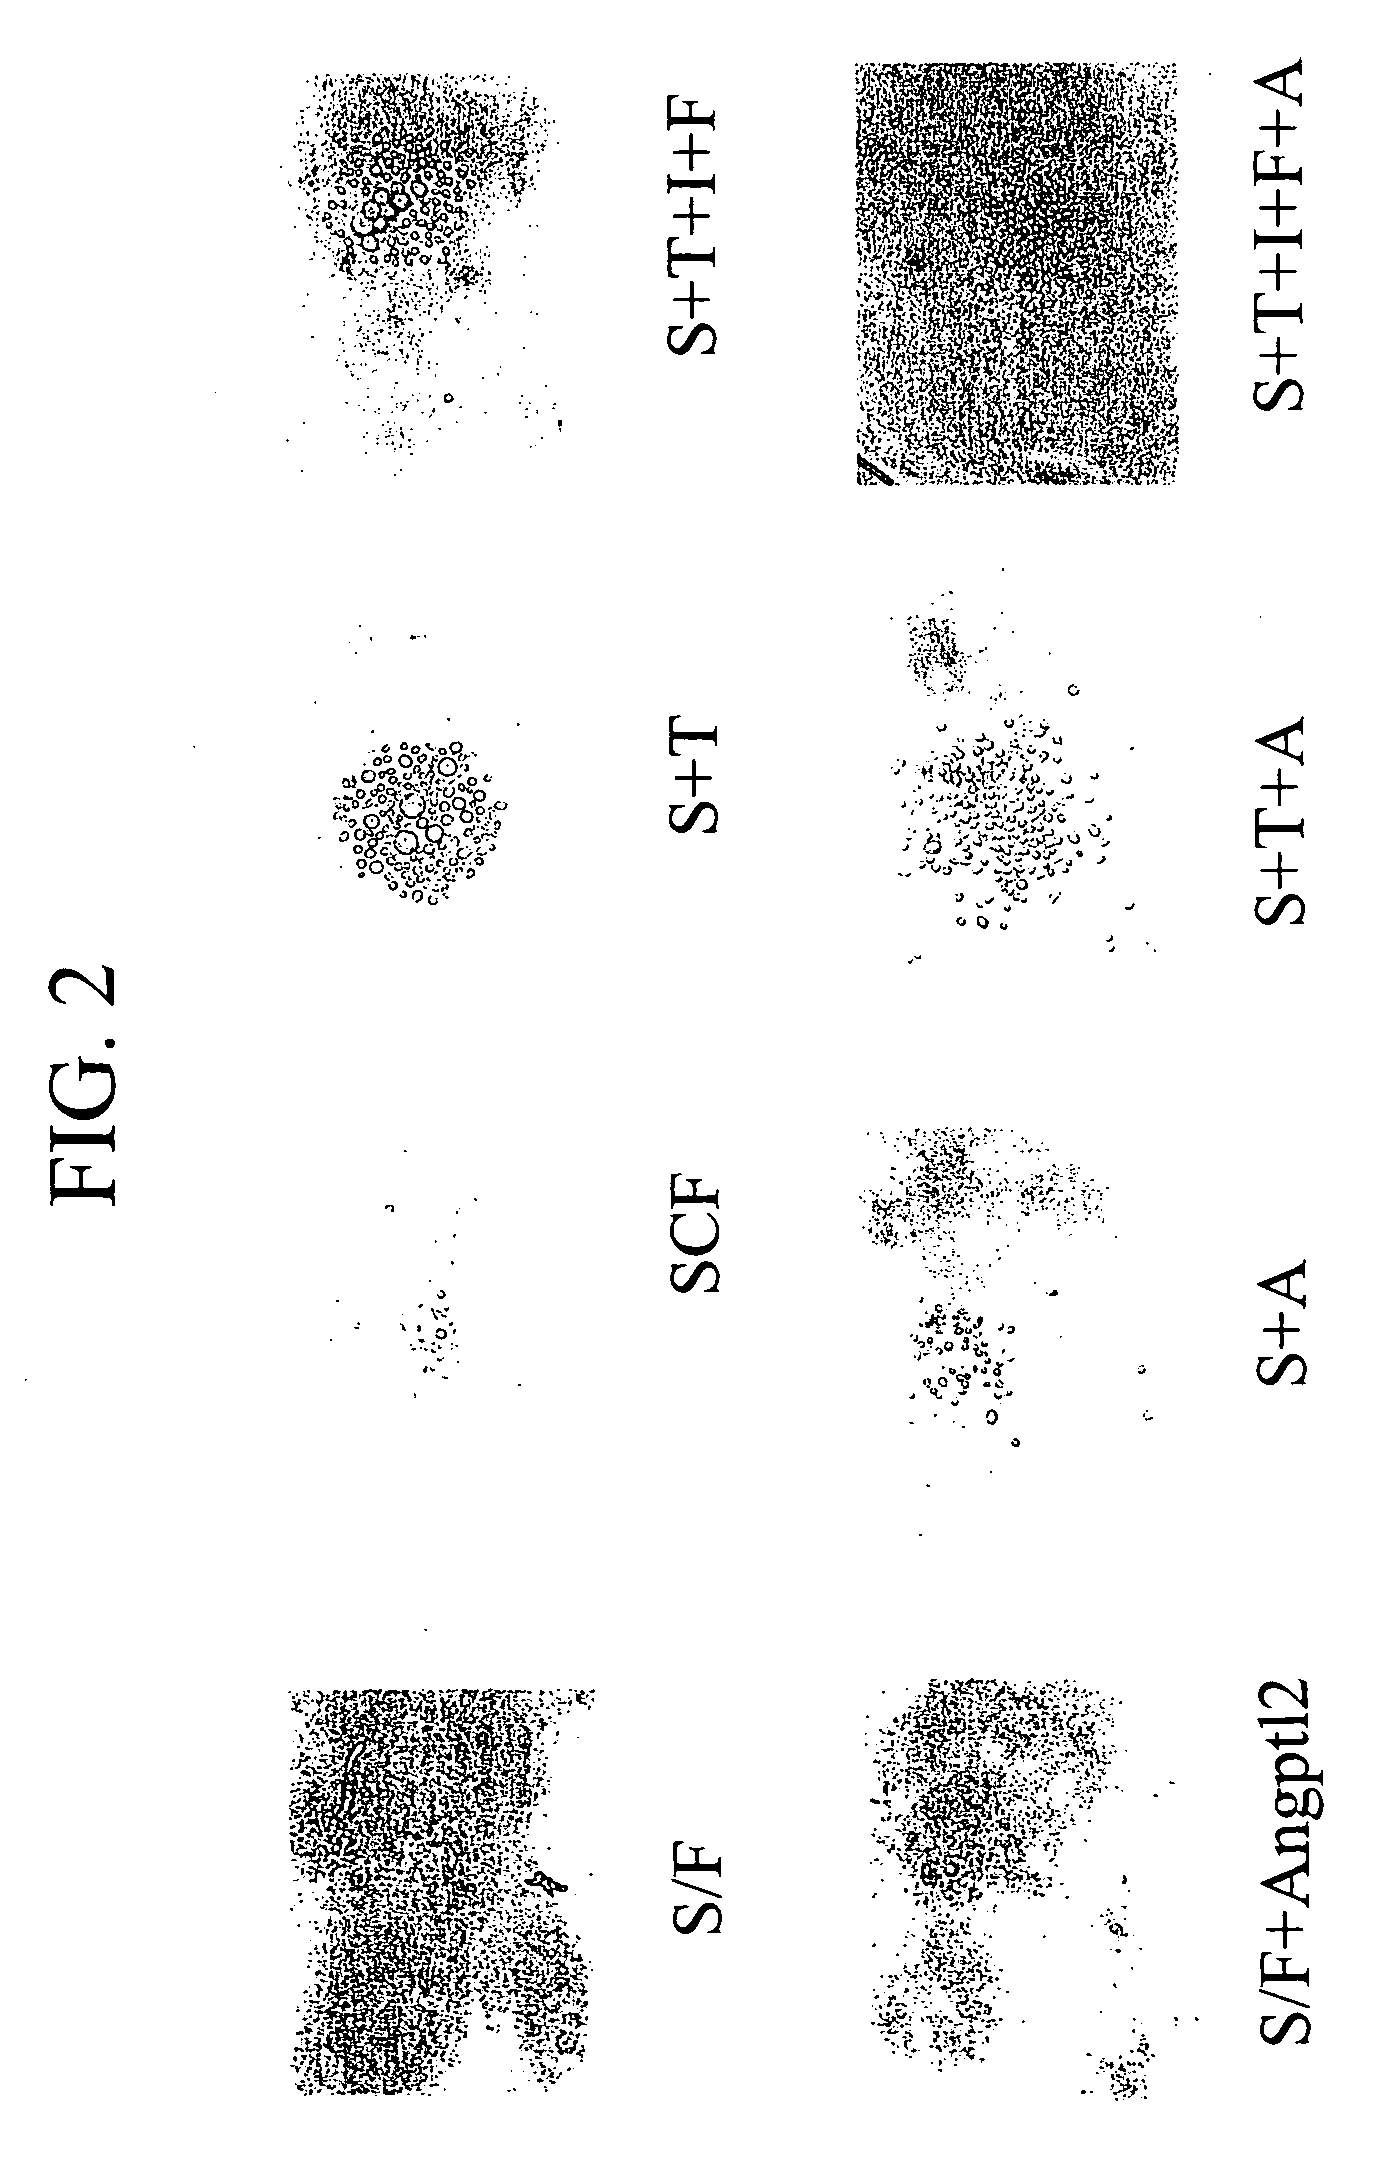 Methods for expansion and analysis of cultured hematopoietic stem cells